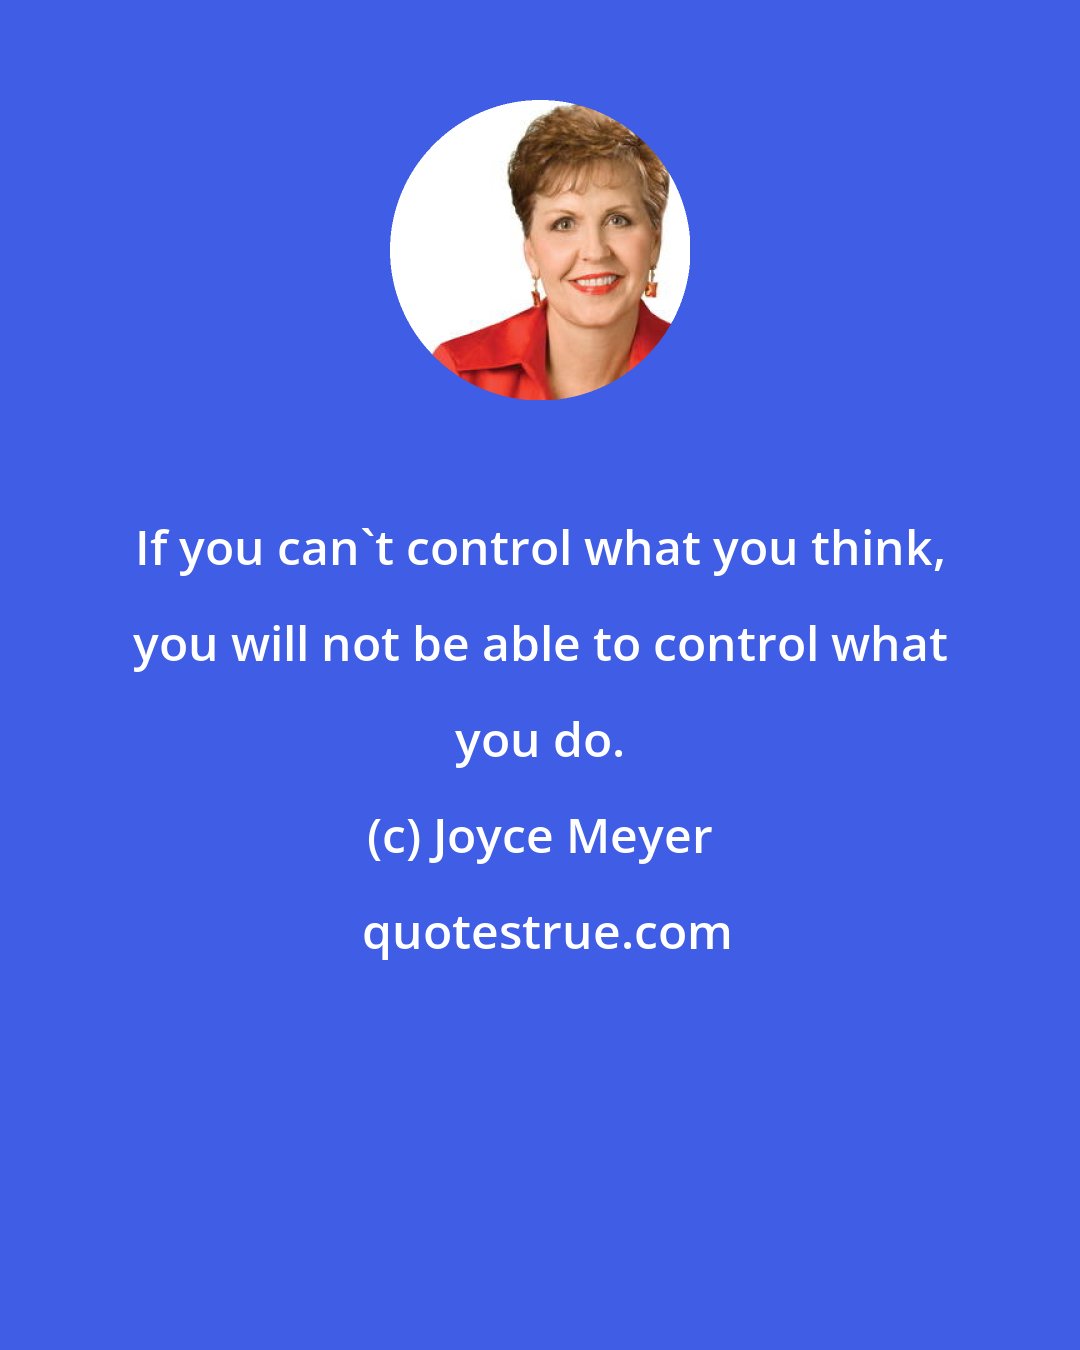 Joyce Meyer: If you can't control what you think, you will not be able to control what you do.